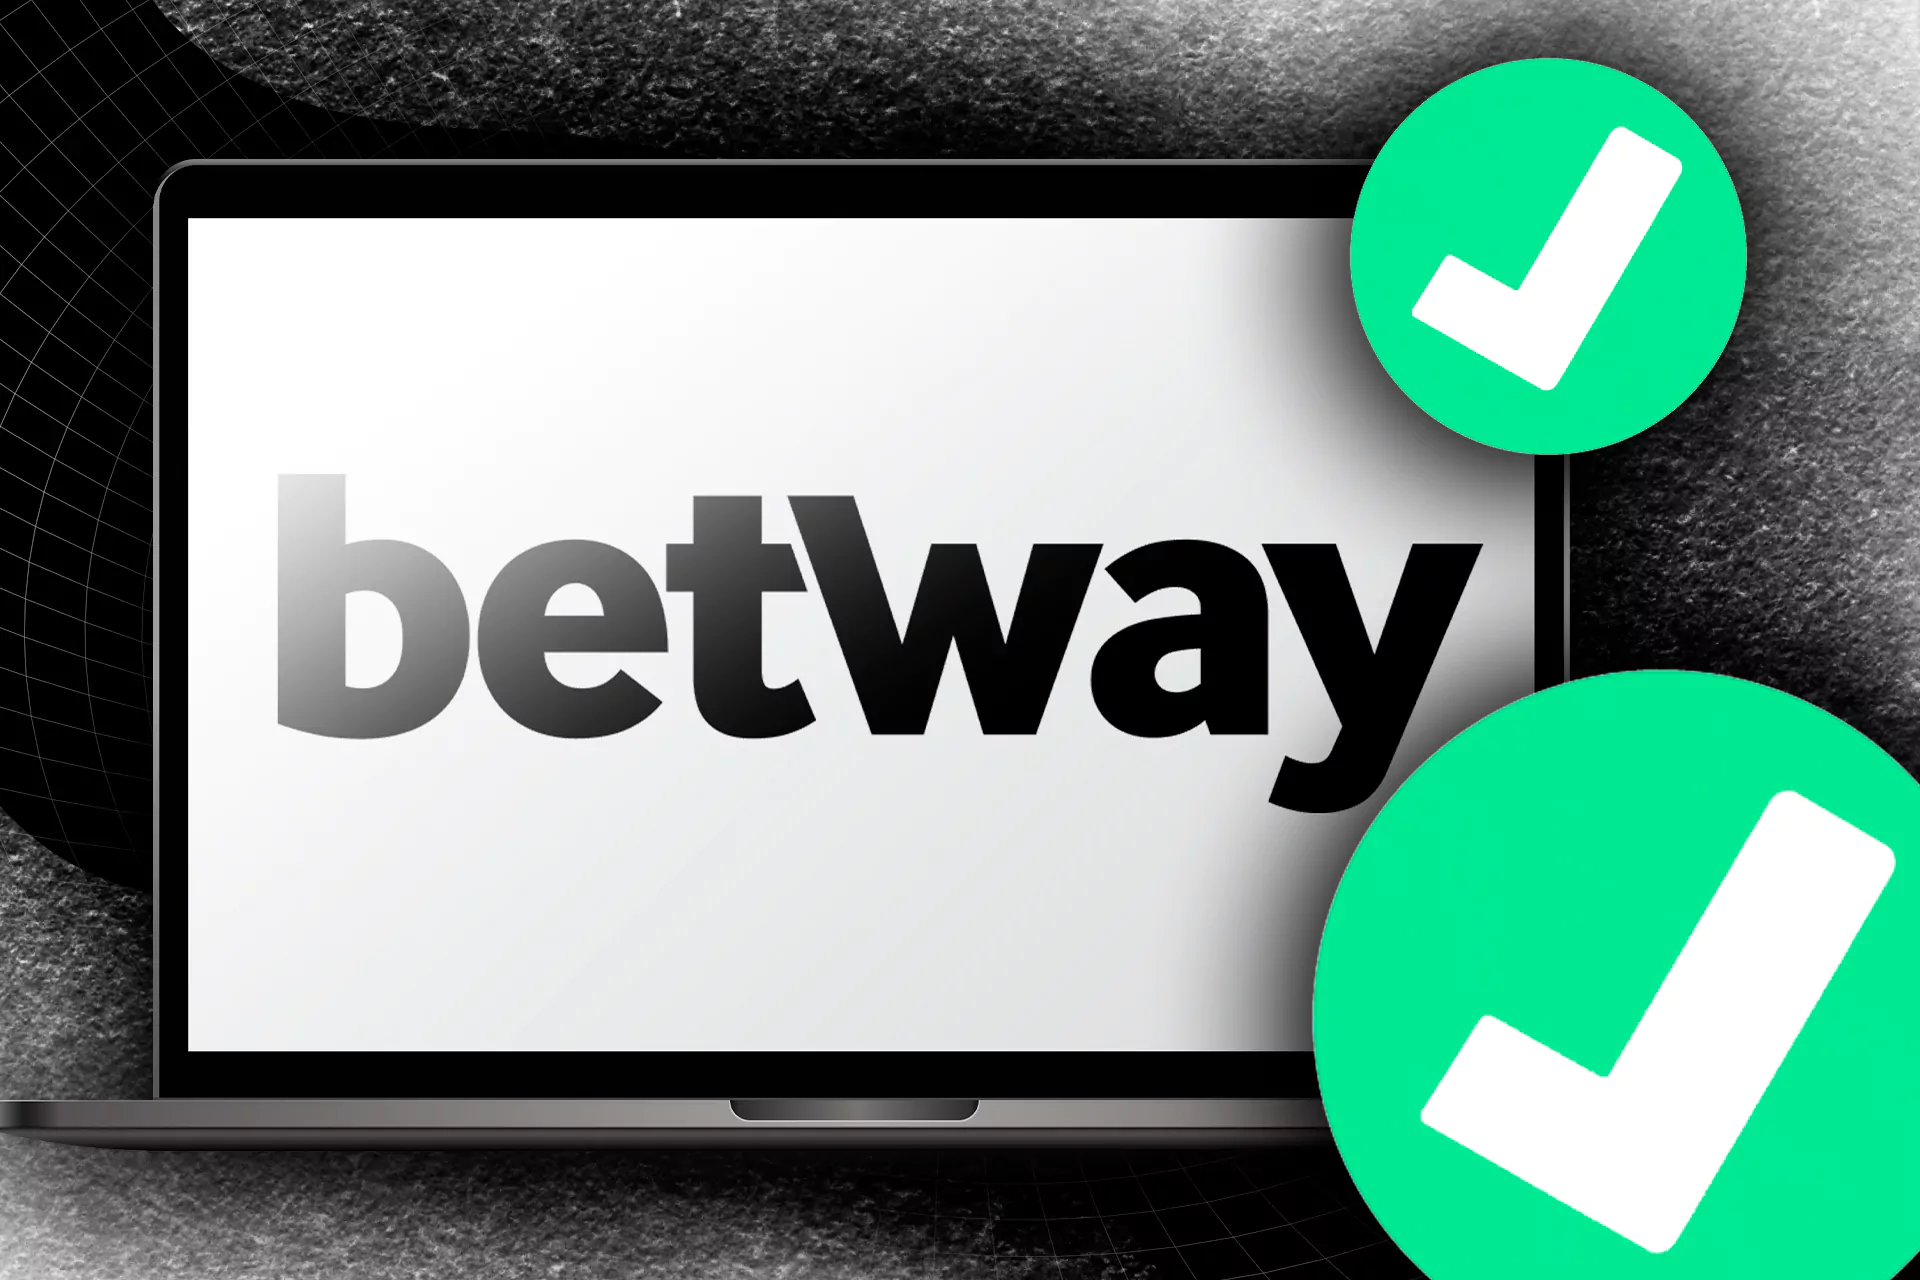 Register at Betway, top up the account and start betting on money.